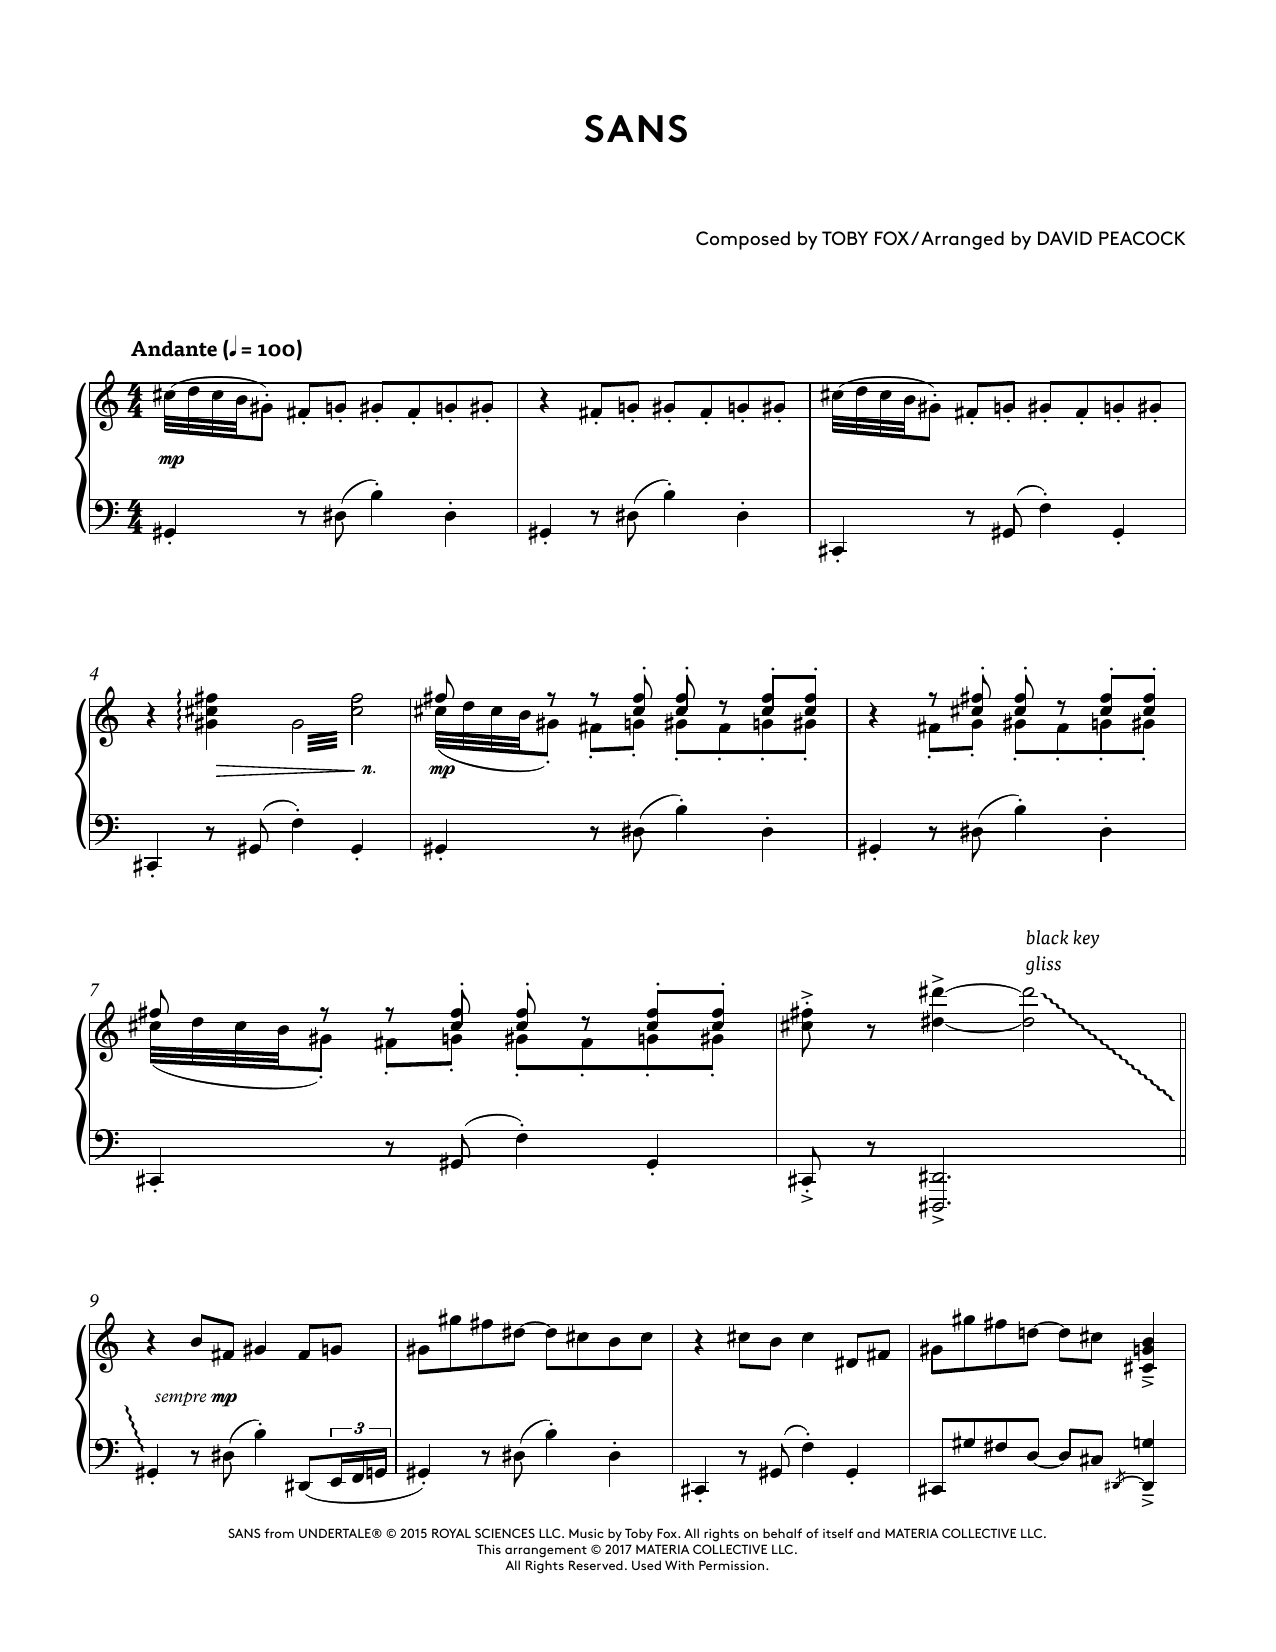 Download Toby Fox Sans (from Undertale Piano Collections Sheet Music